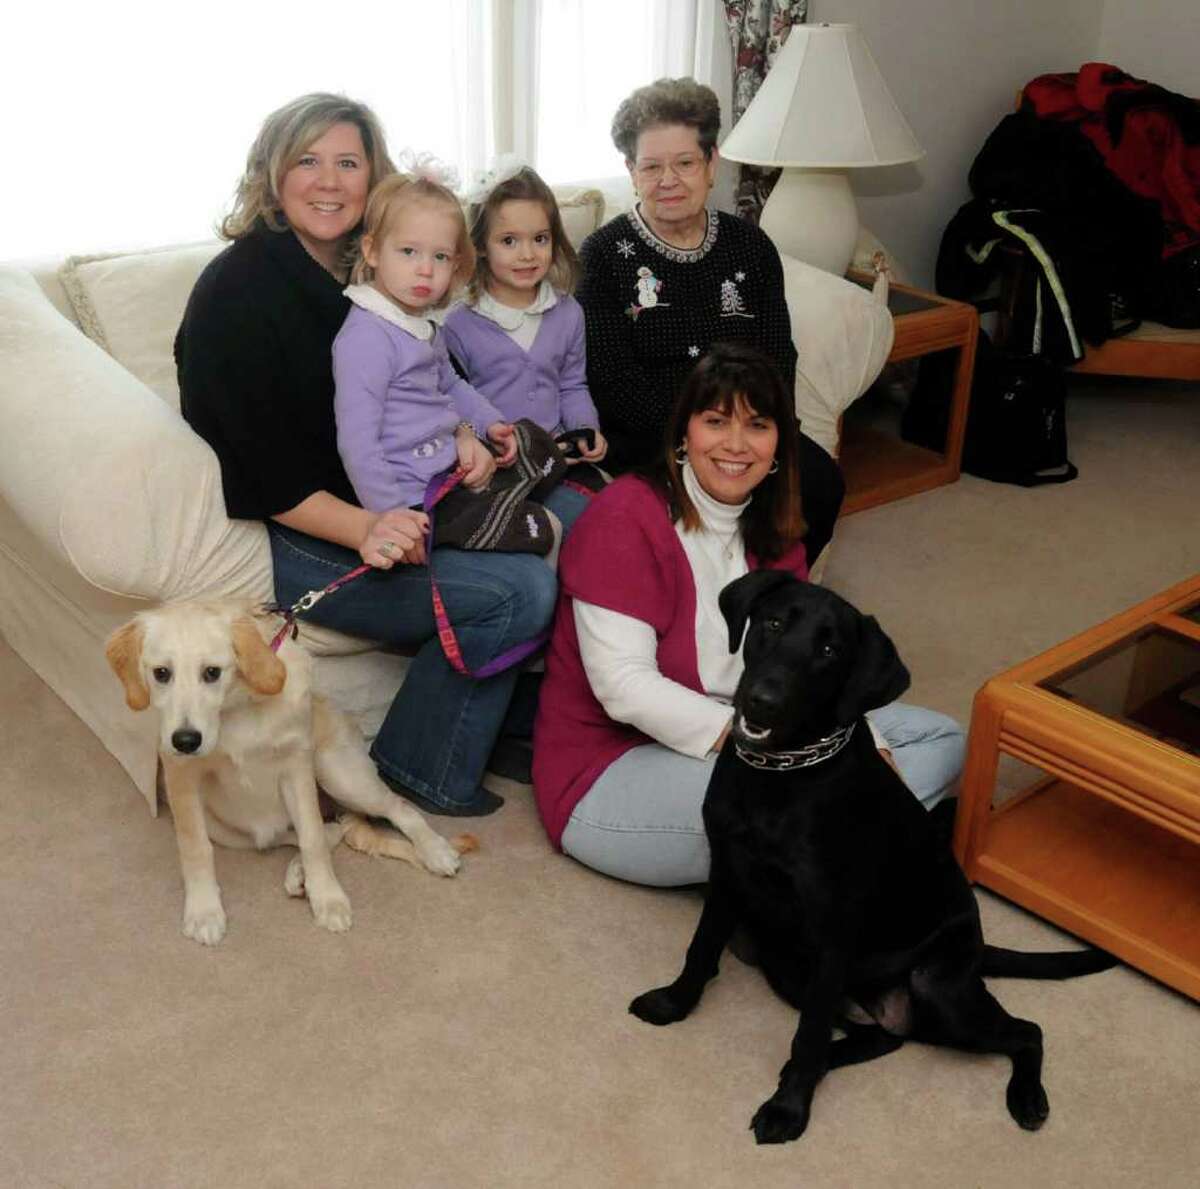 Barbie Mable, front, is reunited with some of the dogs she found homes for on Friday Jan. 14, 2011 at her home in New Fairifield. From left, Debra Mitchell of Southbury with her two daughters, Addison, 3, and Kaitlyn, 5, and the families dog ,Molly. Betty Speglevin of Danbury and her dog Lola.